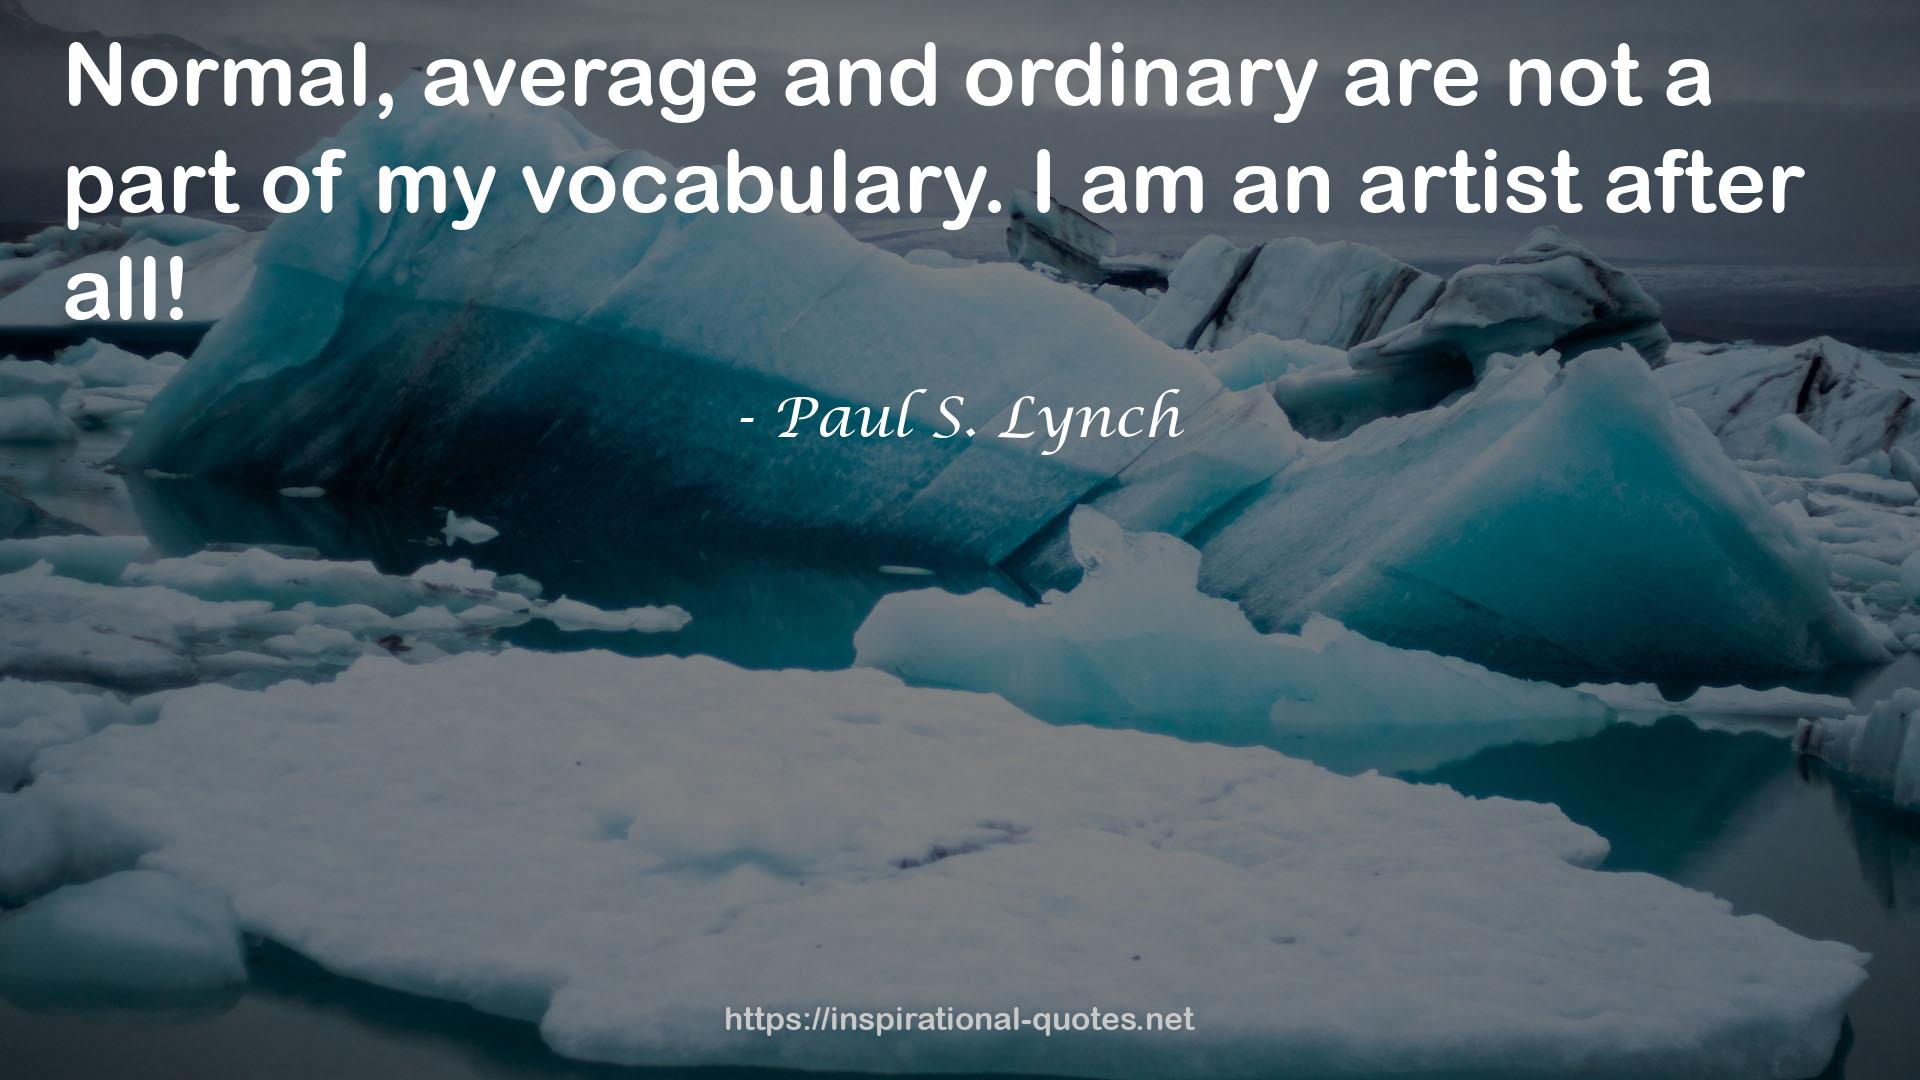 Paul S. Lynch QUOTES